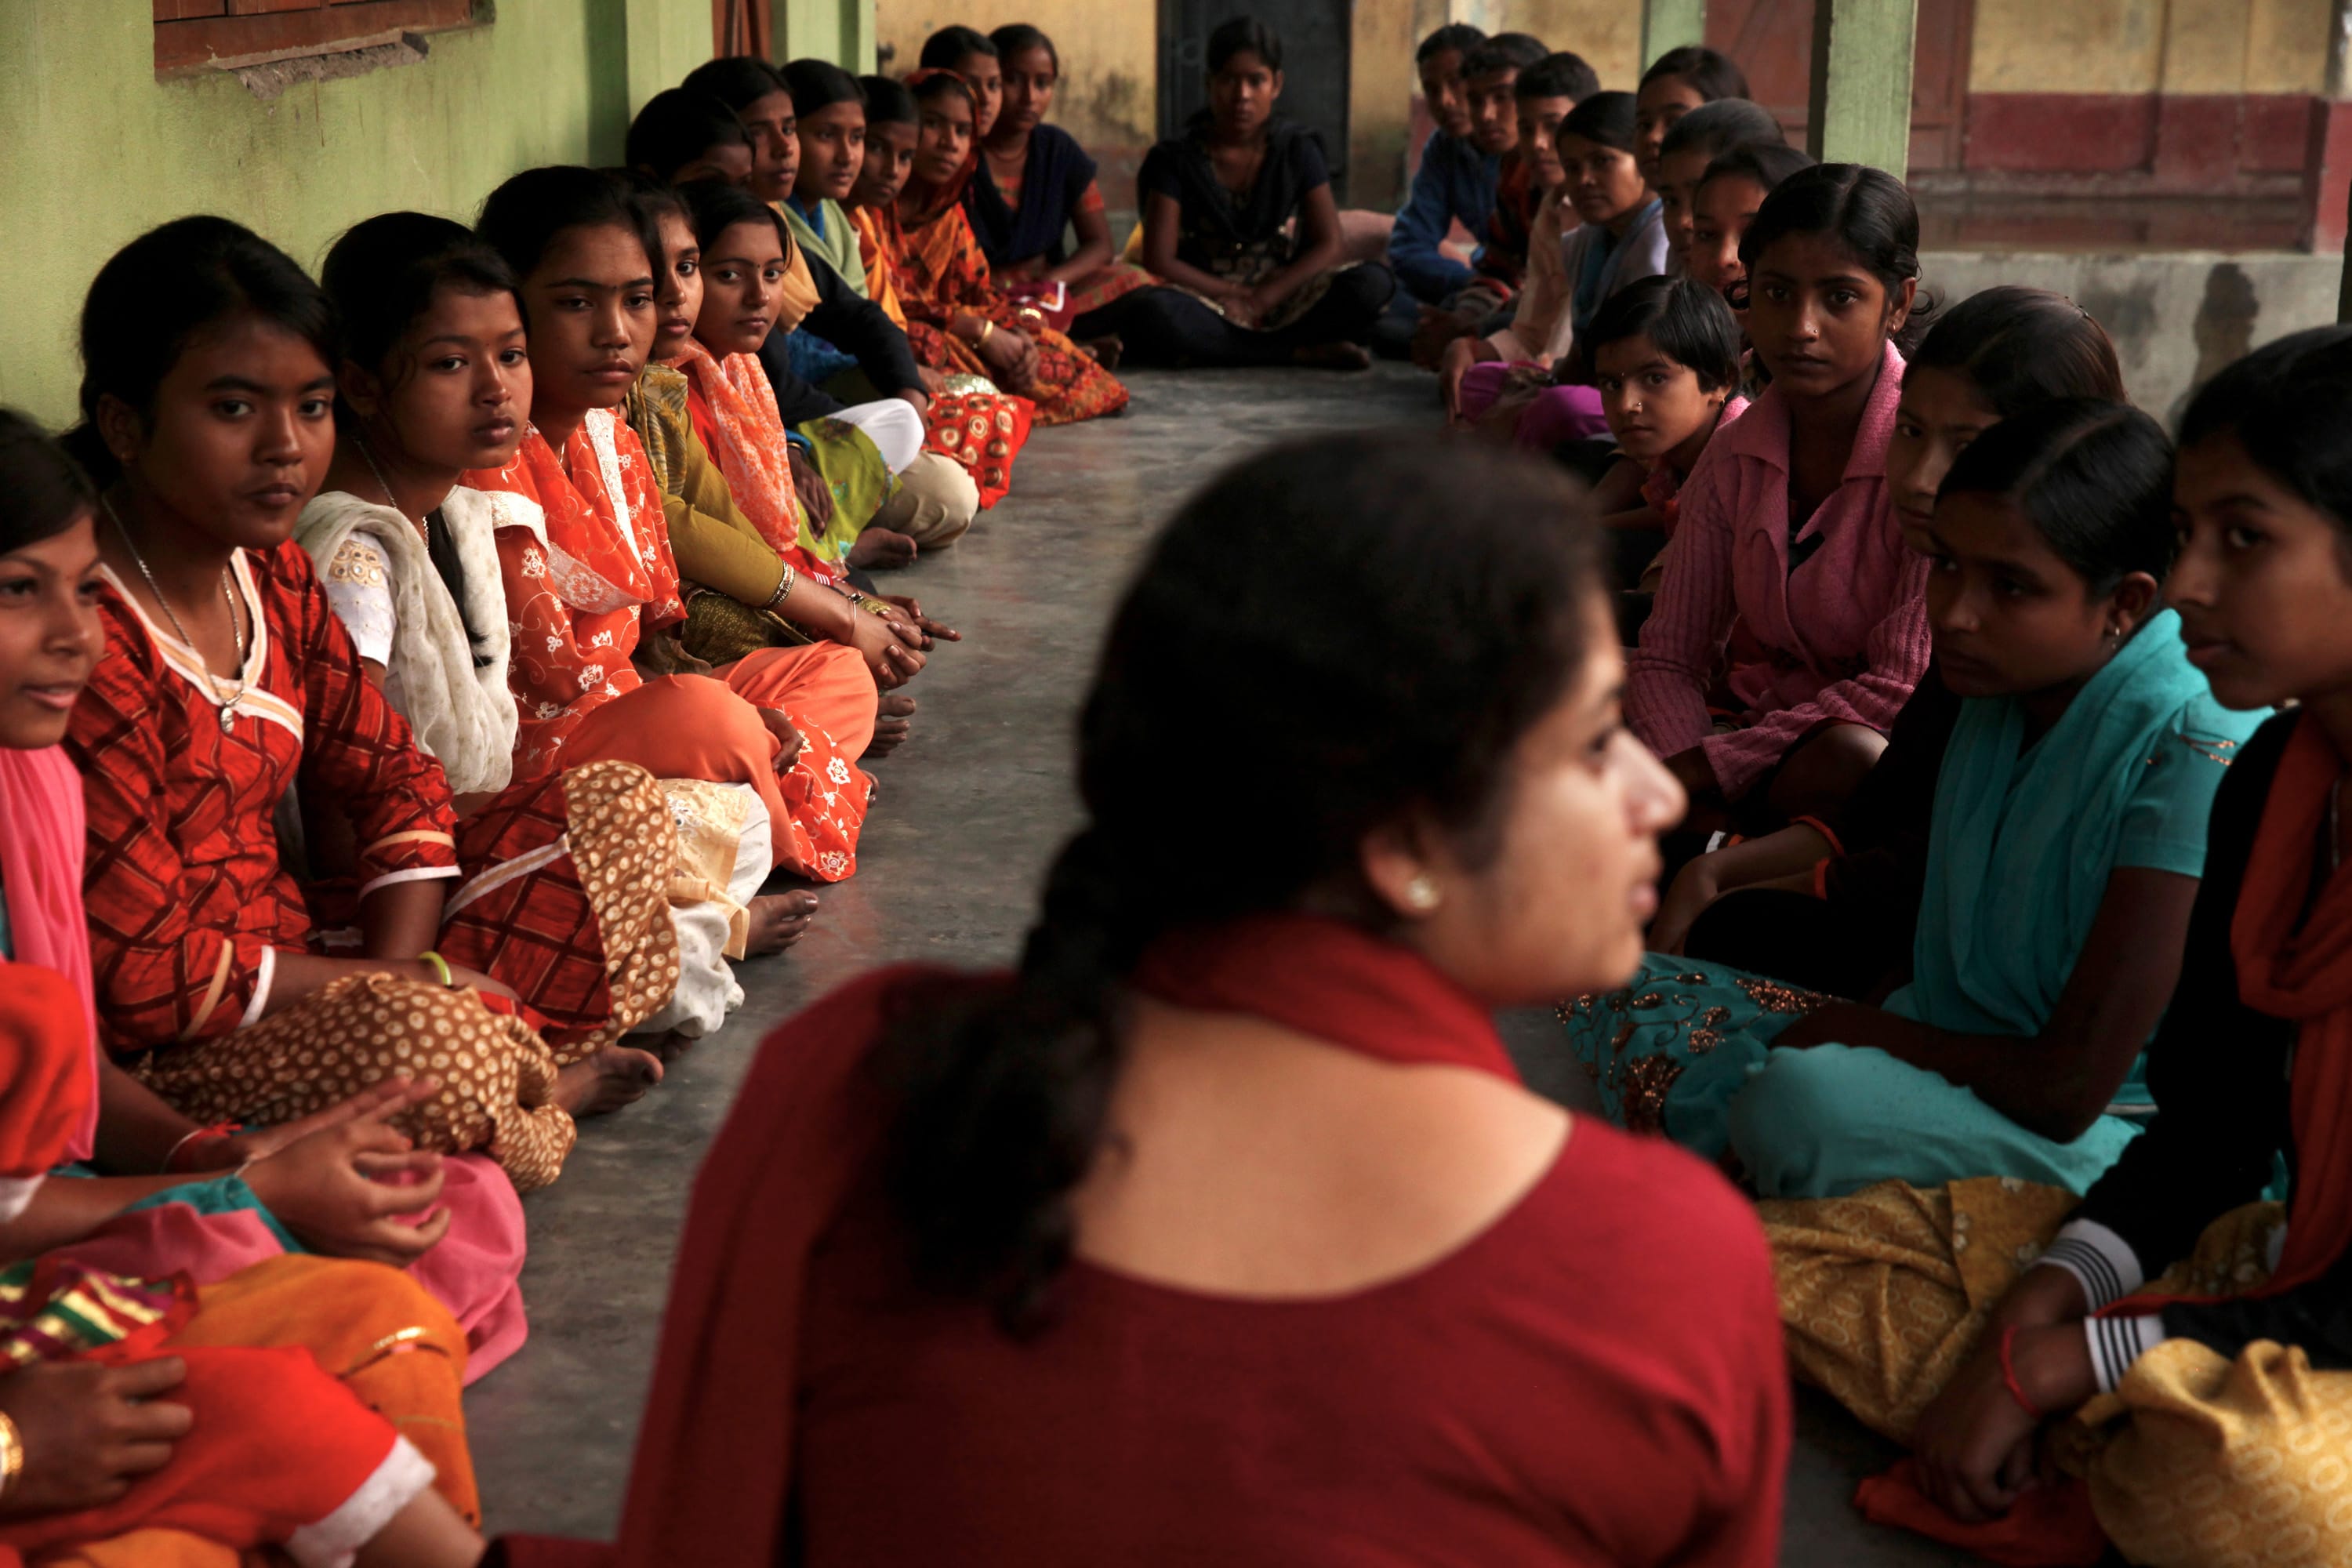 March 2013 – A Month That Brought More Empowerment for Women in Both India and America